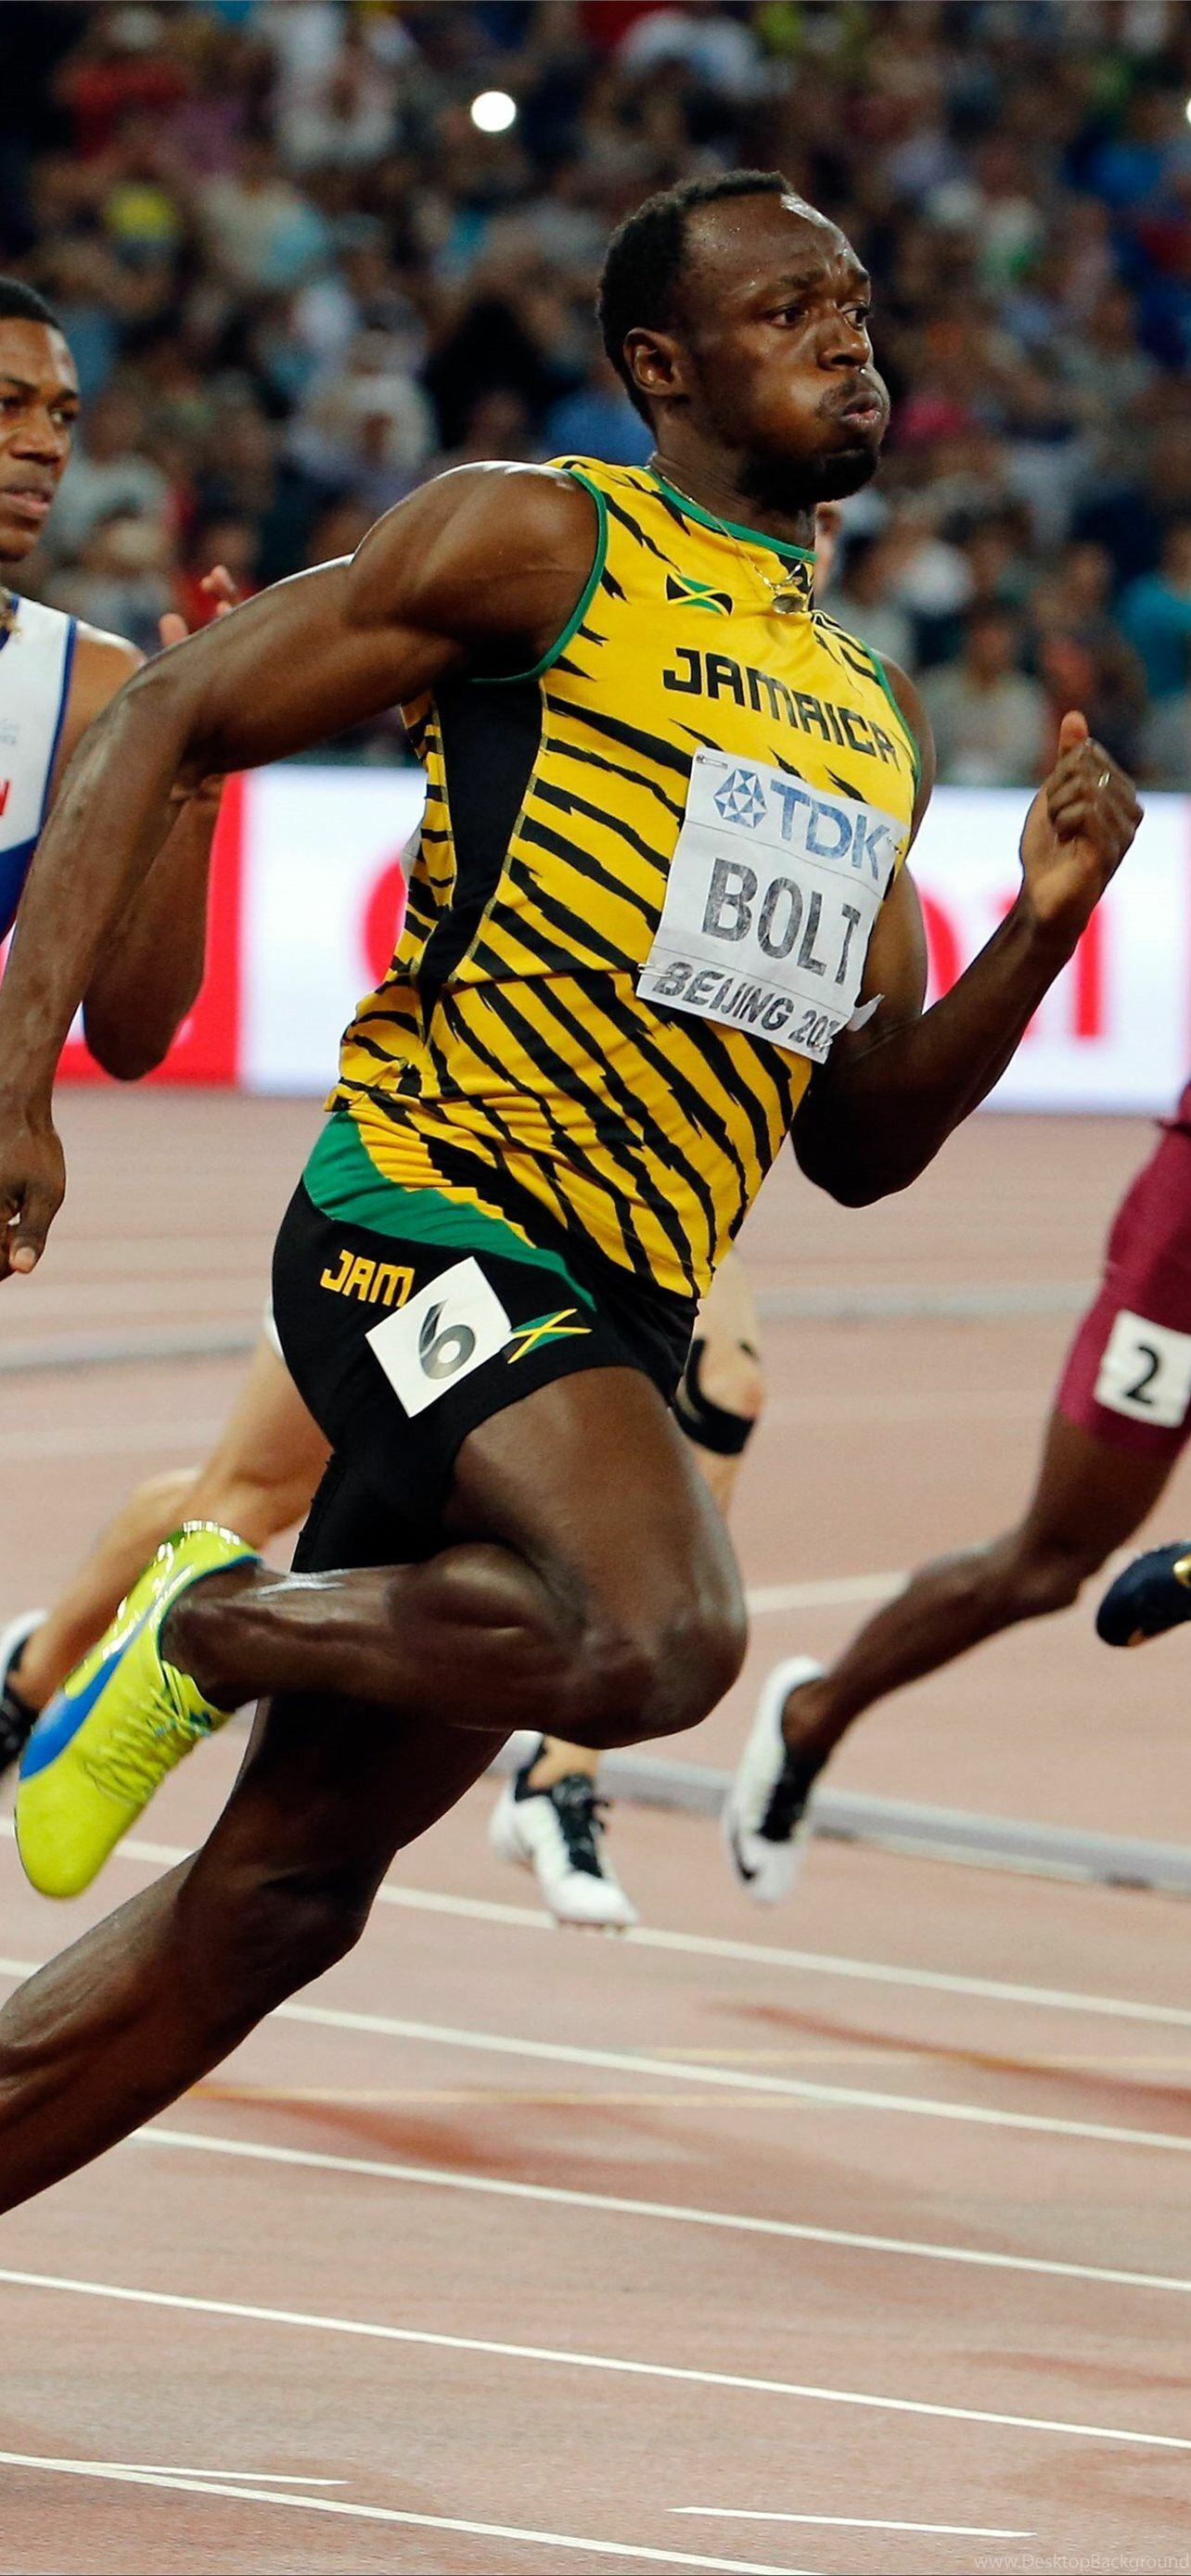 Usain Bolt: He has twice broken the 200 meters world record, setting 19.30 in 2008 and 19.19 in 2009. 1290x2780 HD Background.